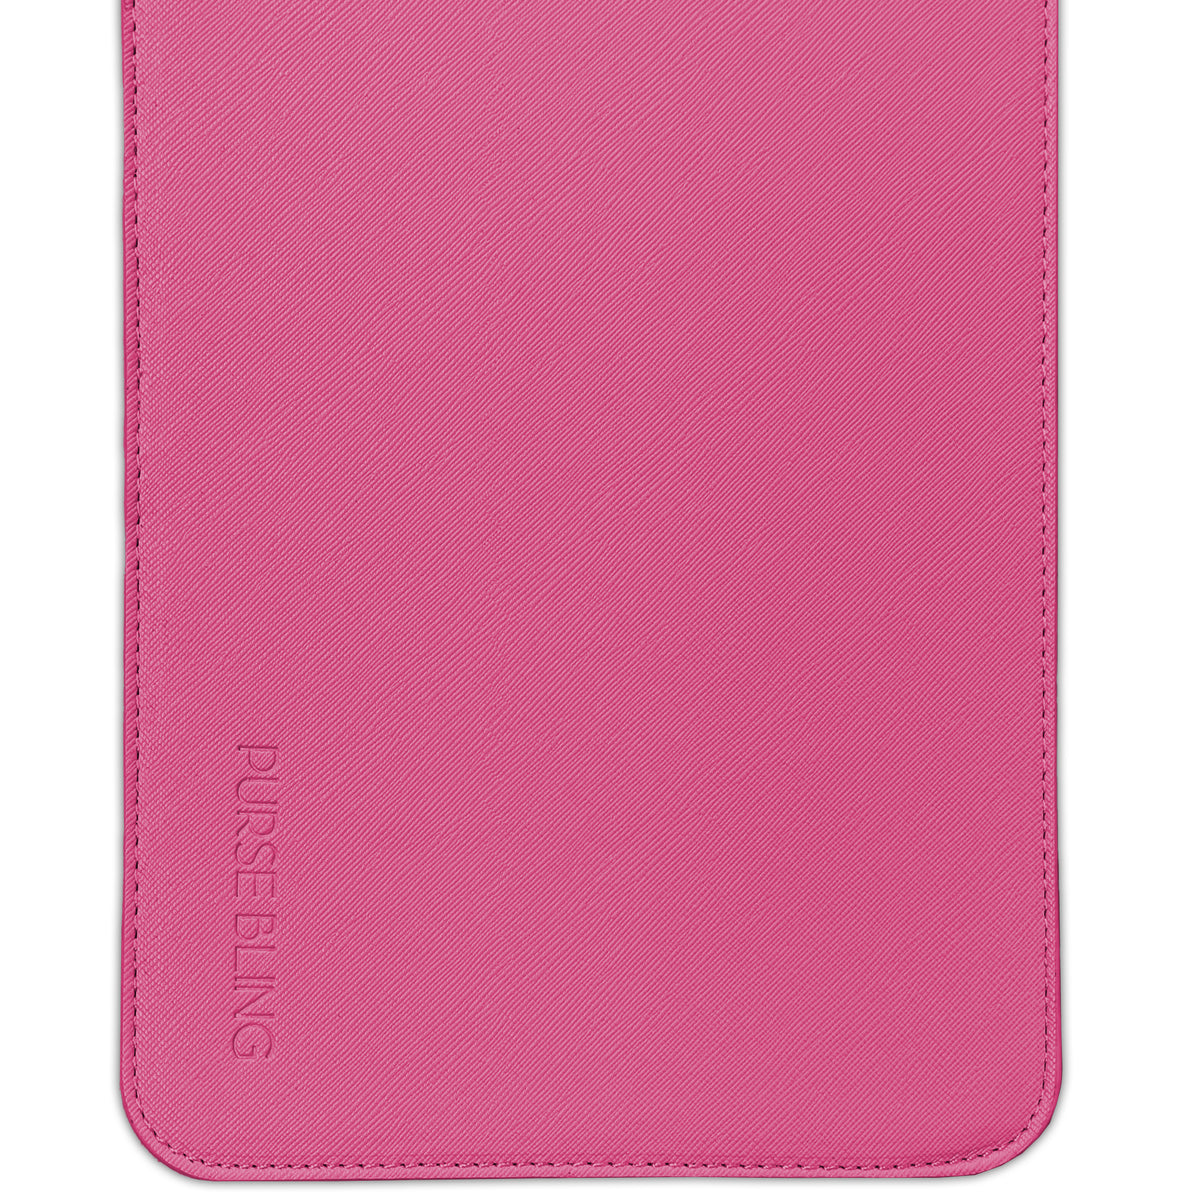 A vegan pink leather sleeve for the iPad, perfect for protecting your device.
Product Name: Base Shaper for LV Neverfull GM
Brand Name: Purse Bling

Revised Sentence: A vegan pink leather sleeve for the iPad, perfect for protecting your Base Shaper for LV Neverfull GM by Purse Bling.